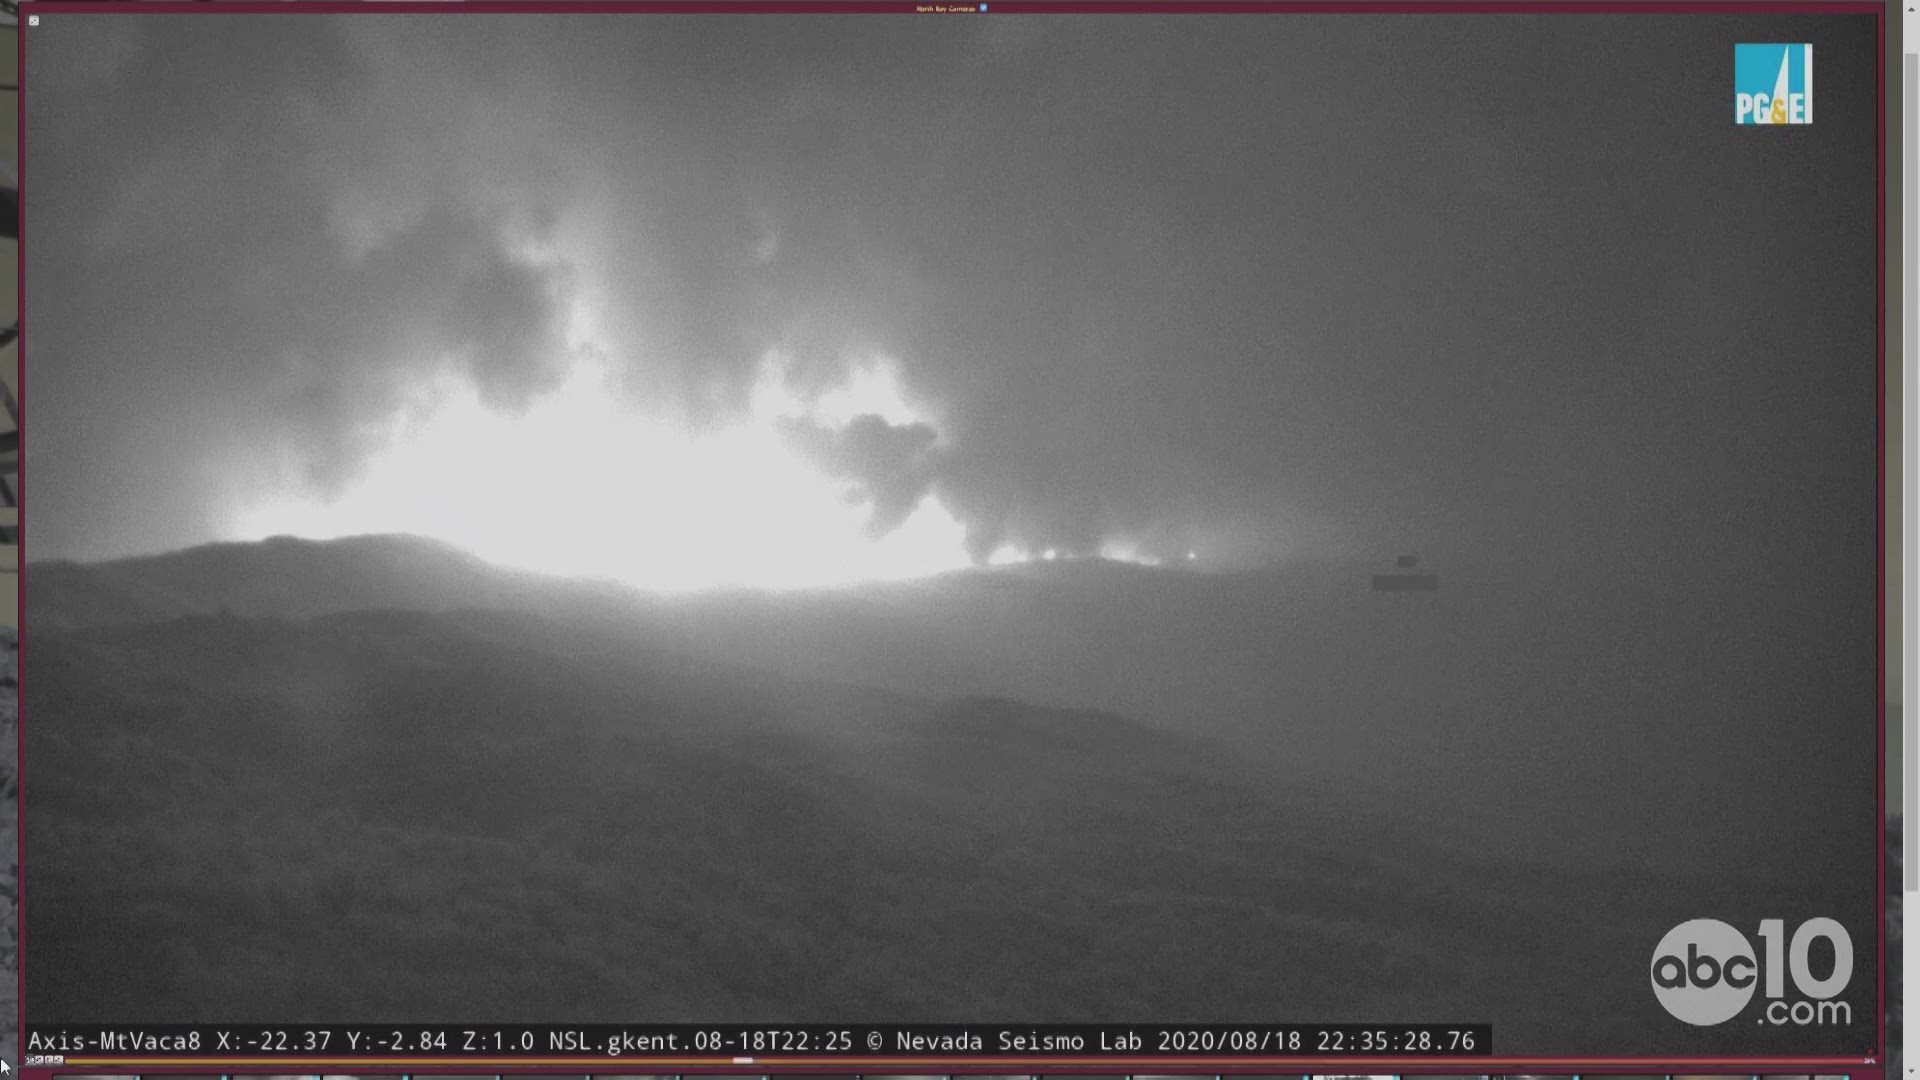 An 'Alert Wildfire' camera on Mount Vaca captured the LNU Lightning Complex fire as it raced up the mountain and eventually burned the camera overnight.